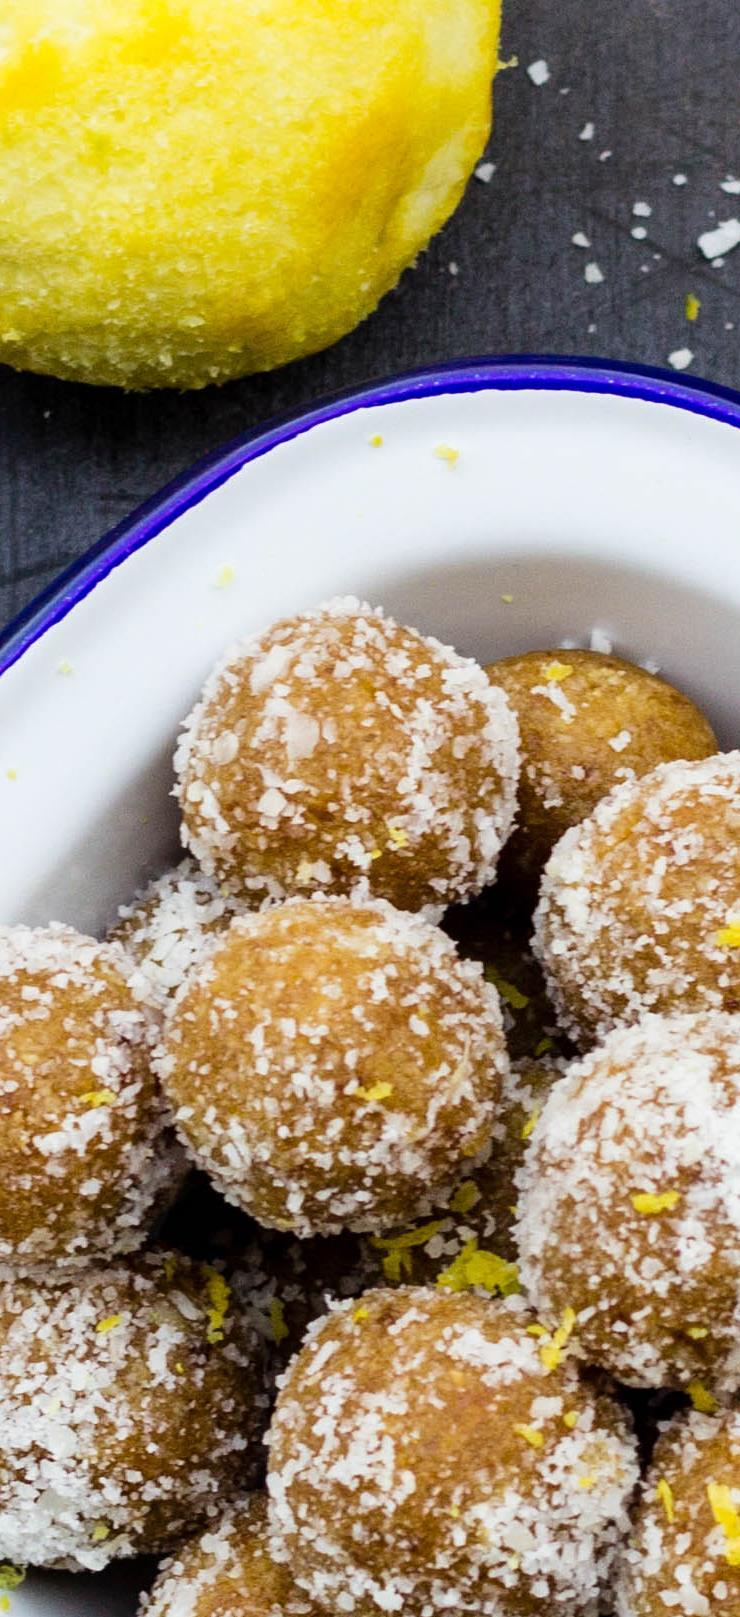 Lemon and coconut bliss balls 2 cups shredded coconut ½ cup ground almonds 2 TBSP maple syrup 2 TBSP coconut oil at room temperature Juice